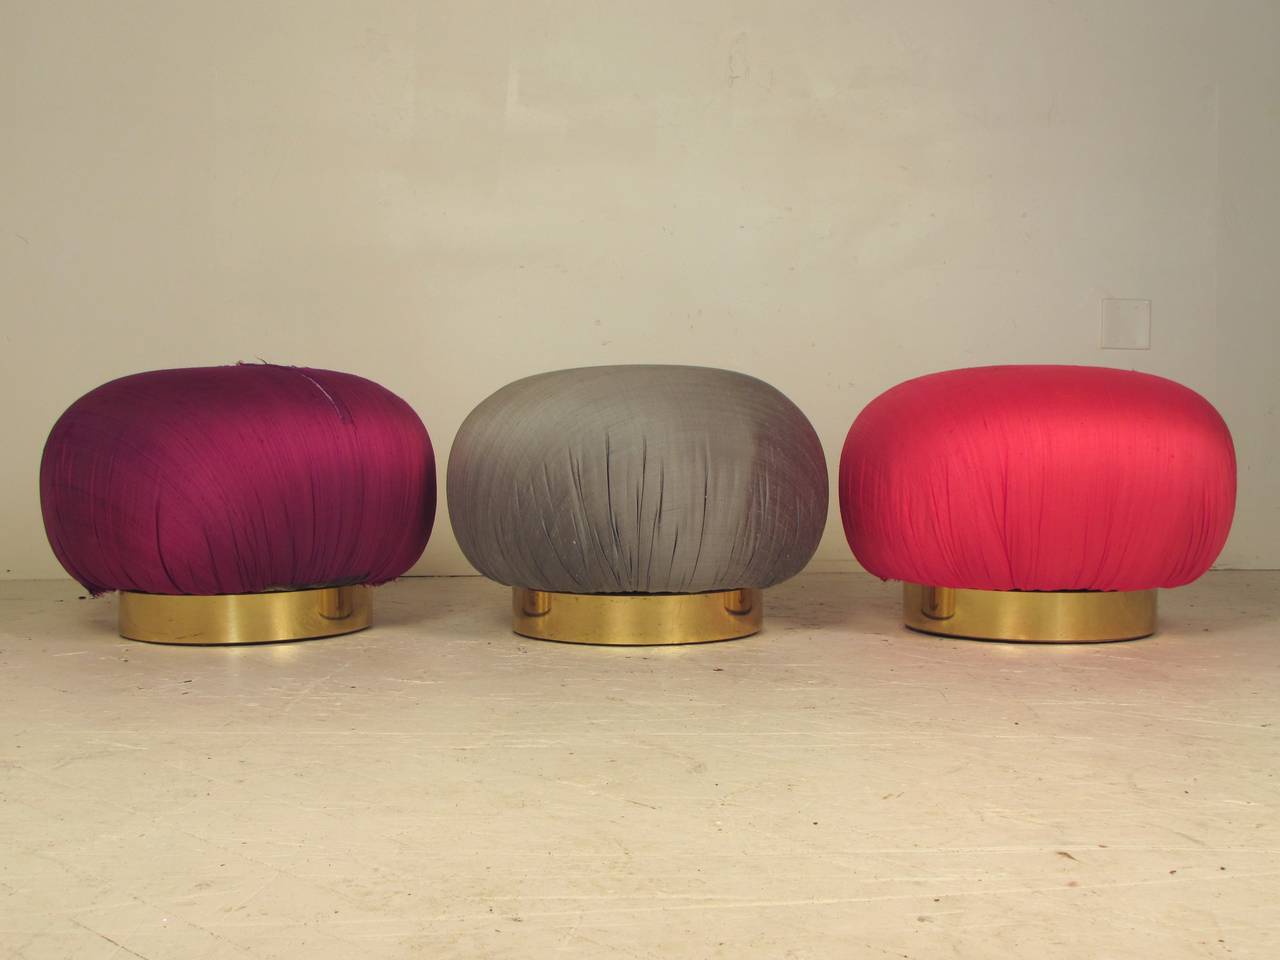 A rare trio of poufs or stools or ottomans by Adrian Pearsall for Comfort Designs, Inc. reminiscent of the work of Karl Springer and Vladimir Kagan. Comfort Designs, Inc. is the company that Mr. Pearsall founded after selling Craft and Associates to